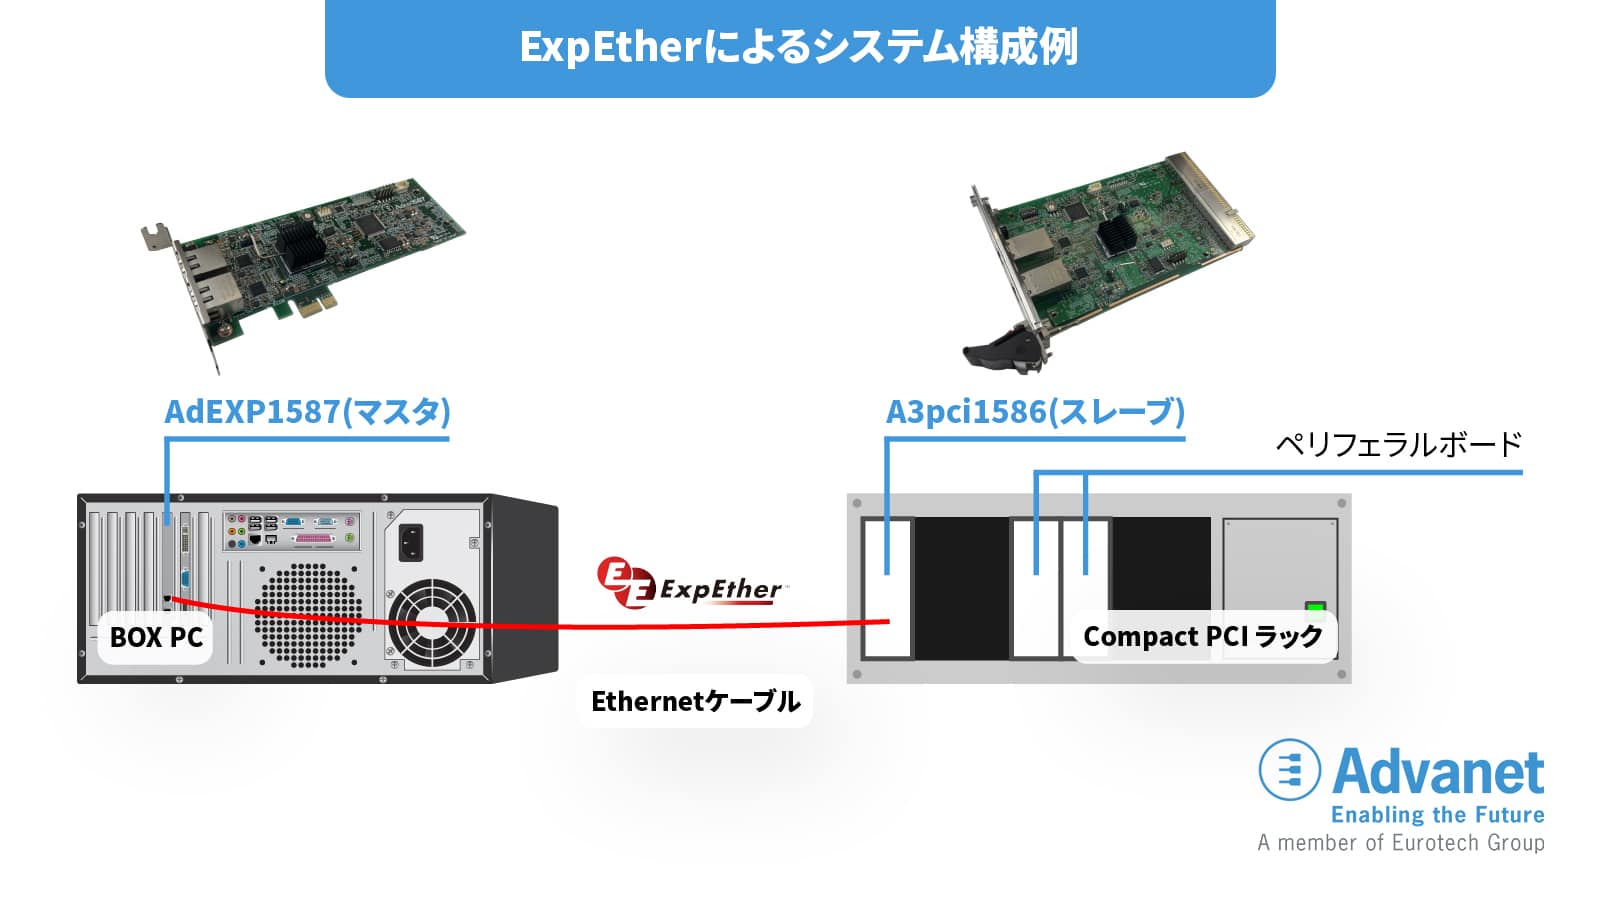 ExpEther System, AdEXP1587 and A3pci1586